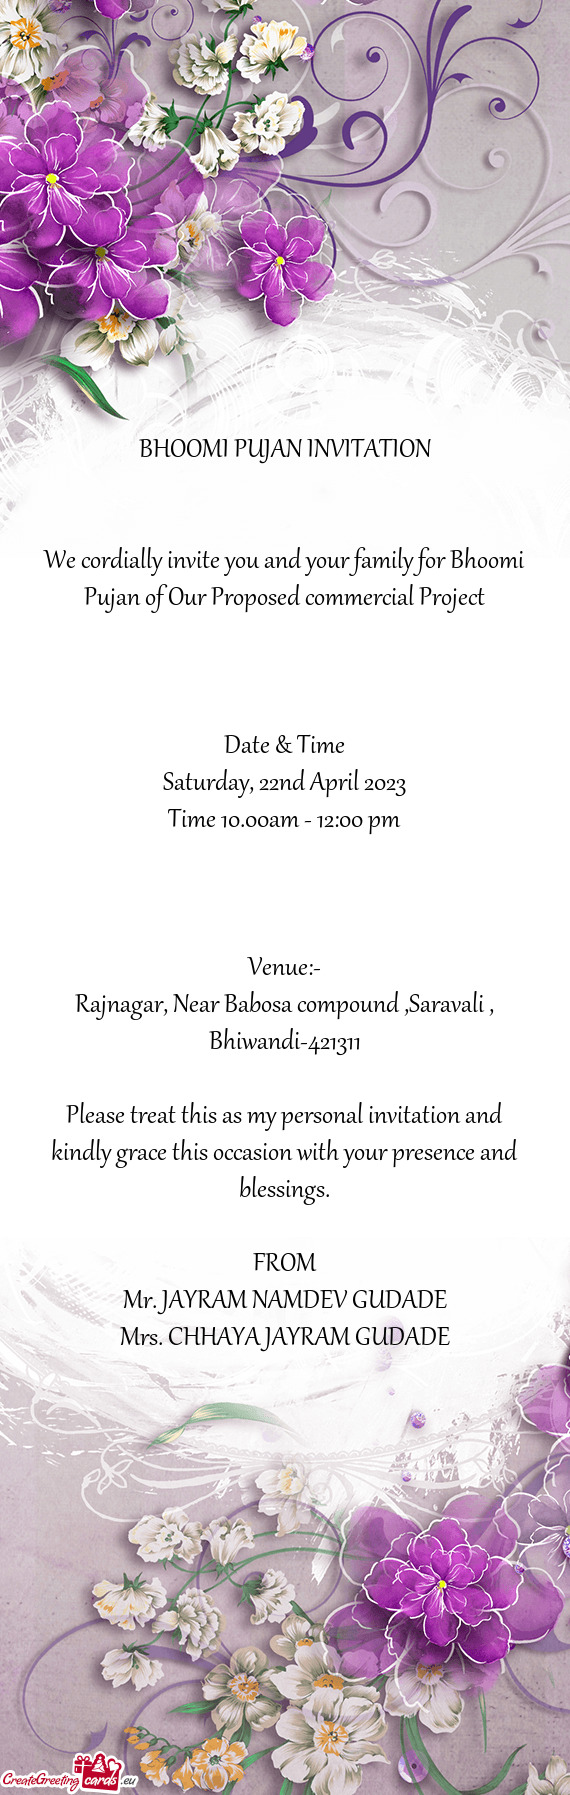 We cordially invite you and your family for Bhoomi Pujan of Our Proposed commercial Project